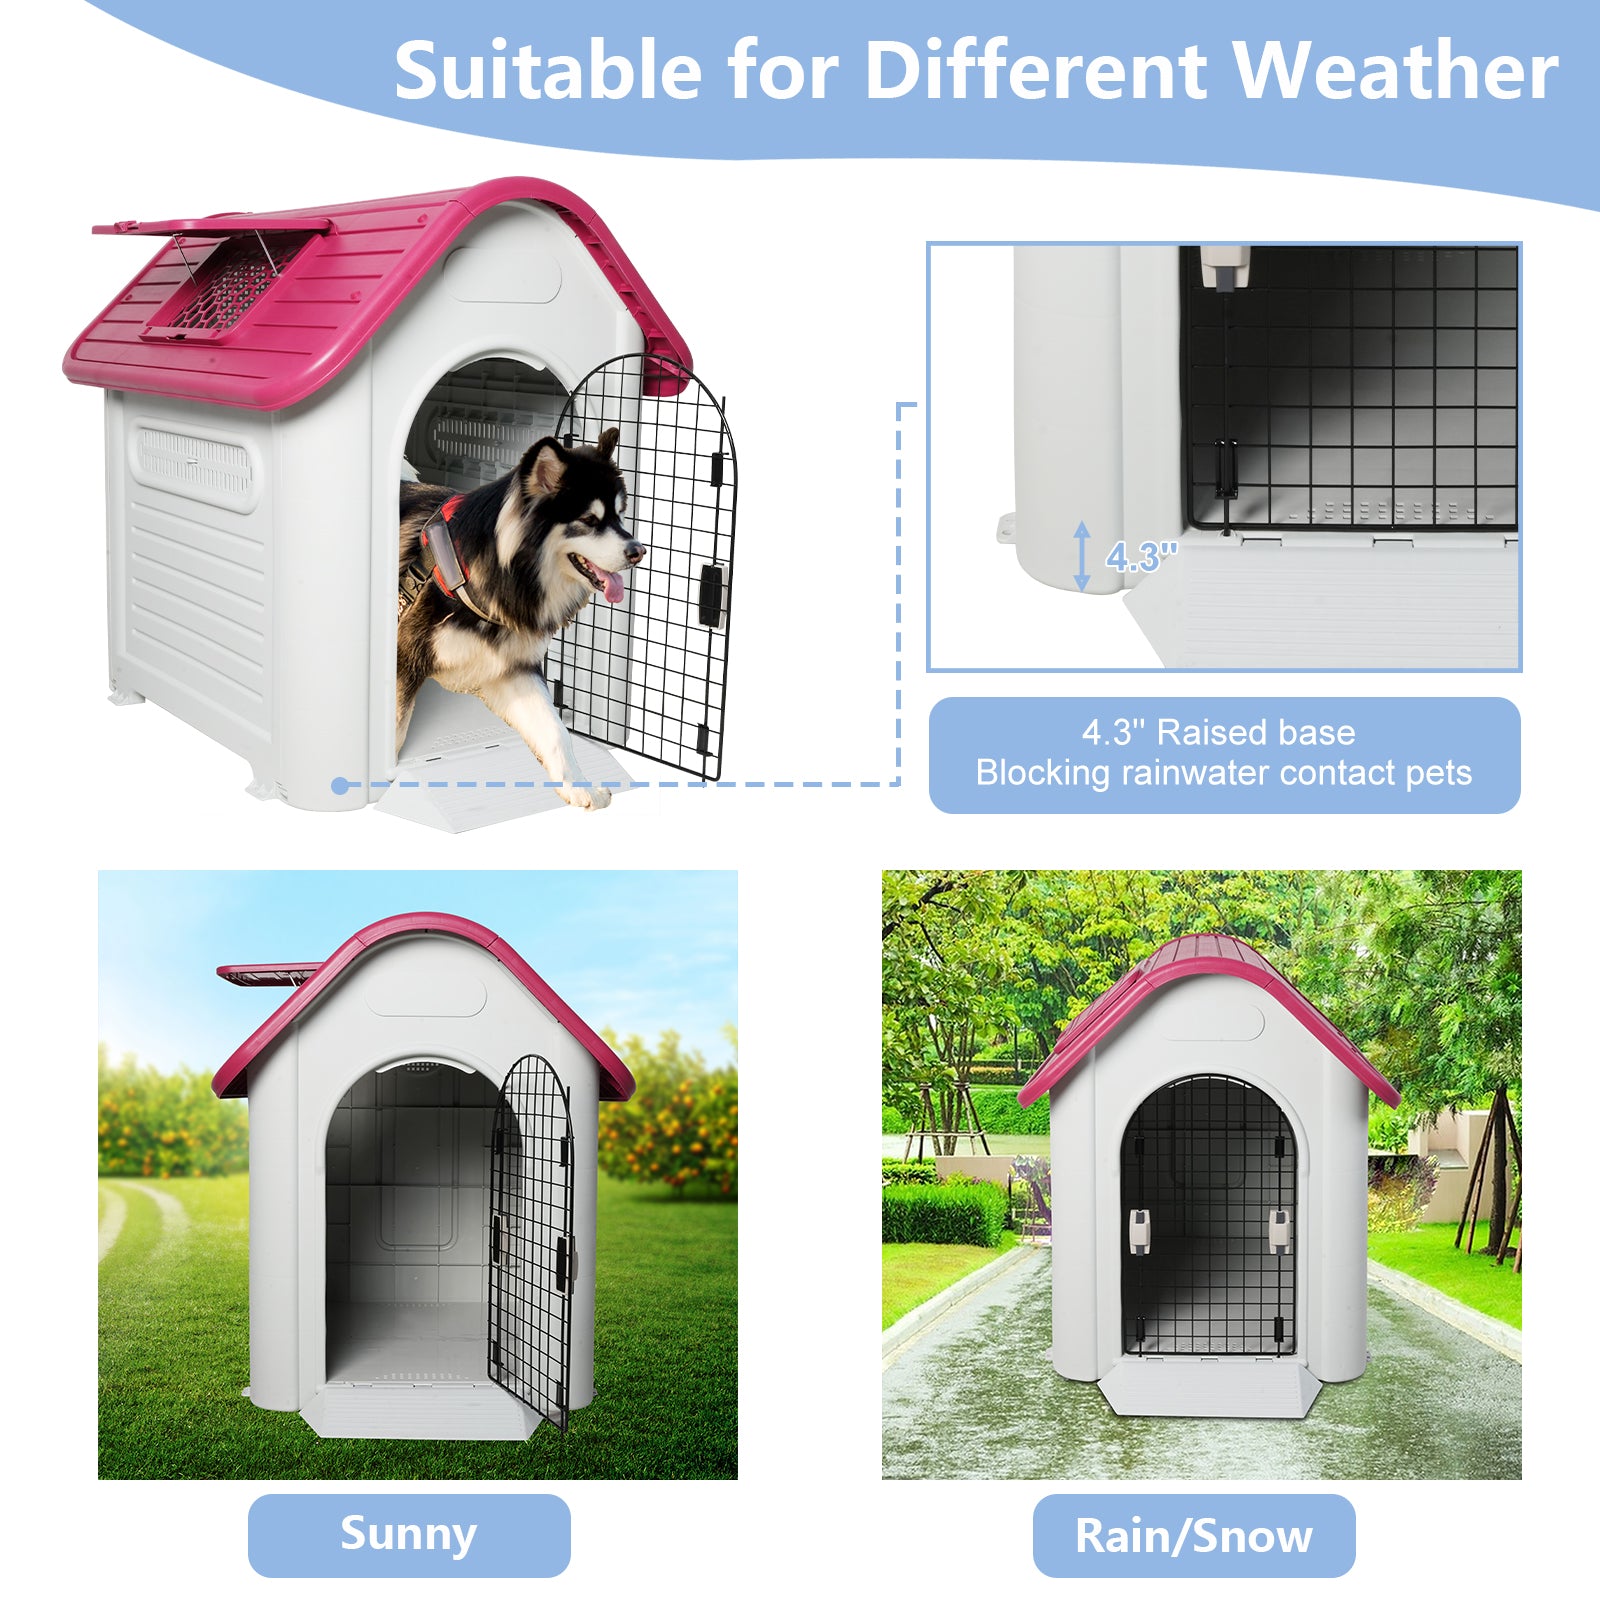 Outdoor Dog House Plastic Waterproof Kennel with Air Vents, 42"L x 33"W x 38"H, Red Roof